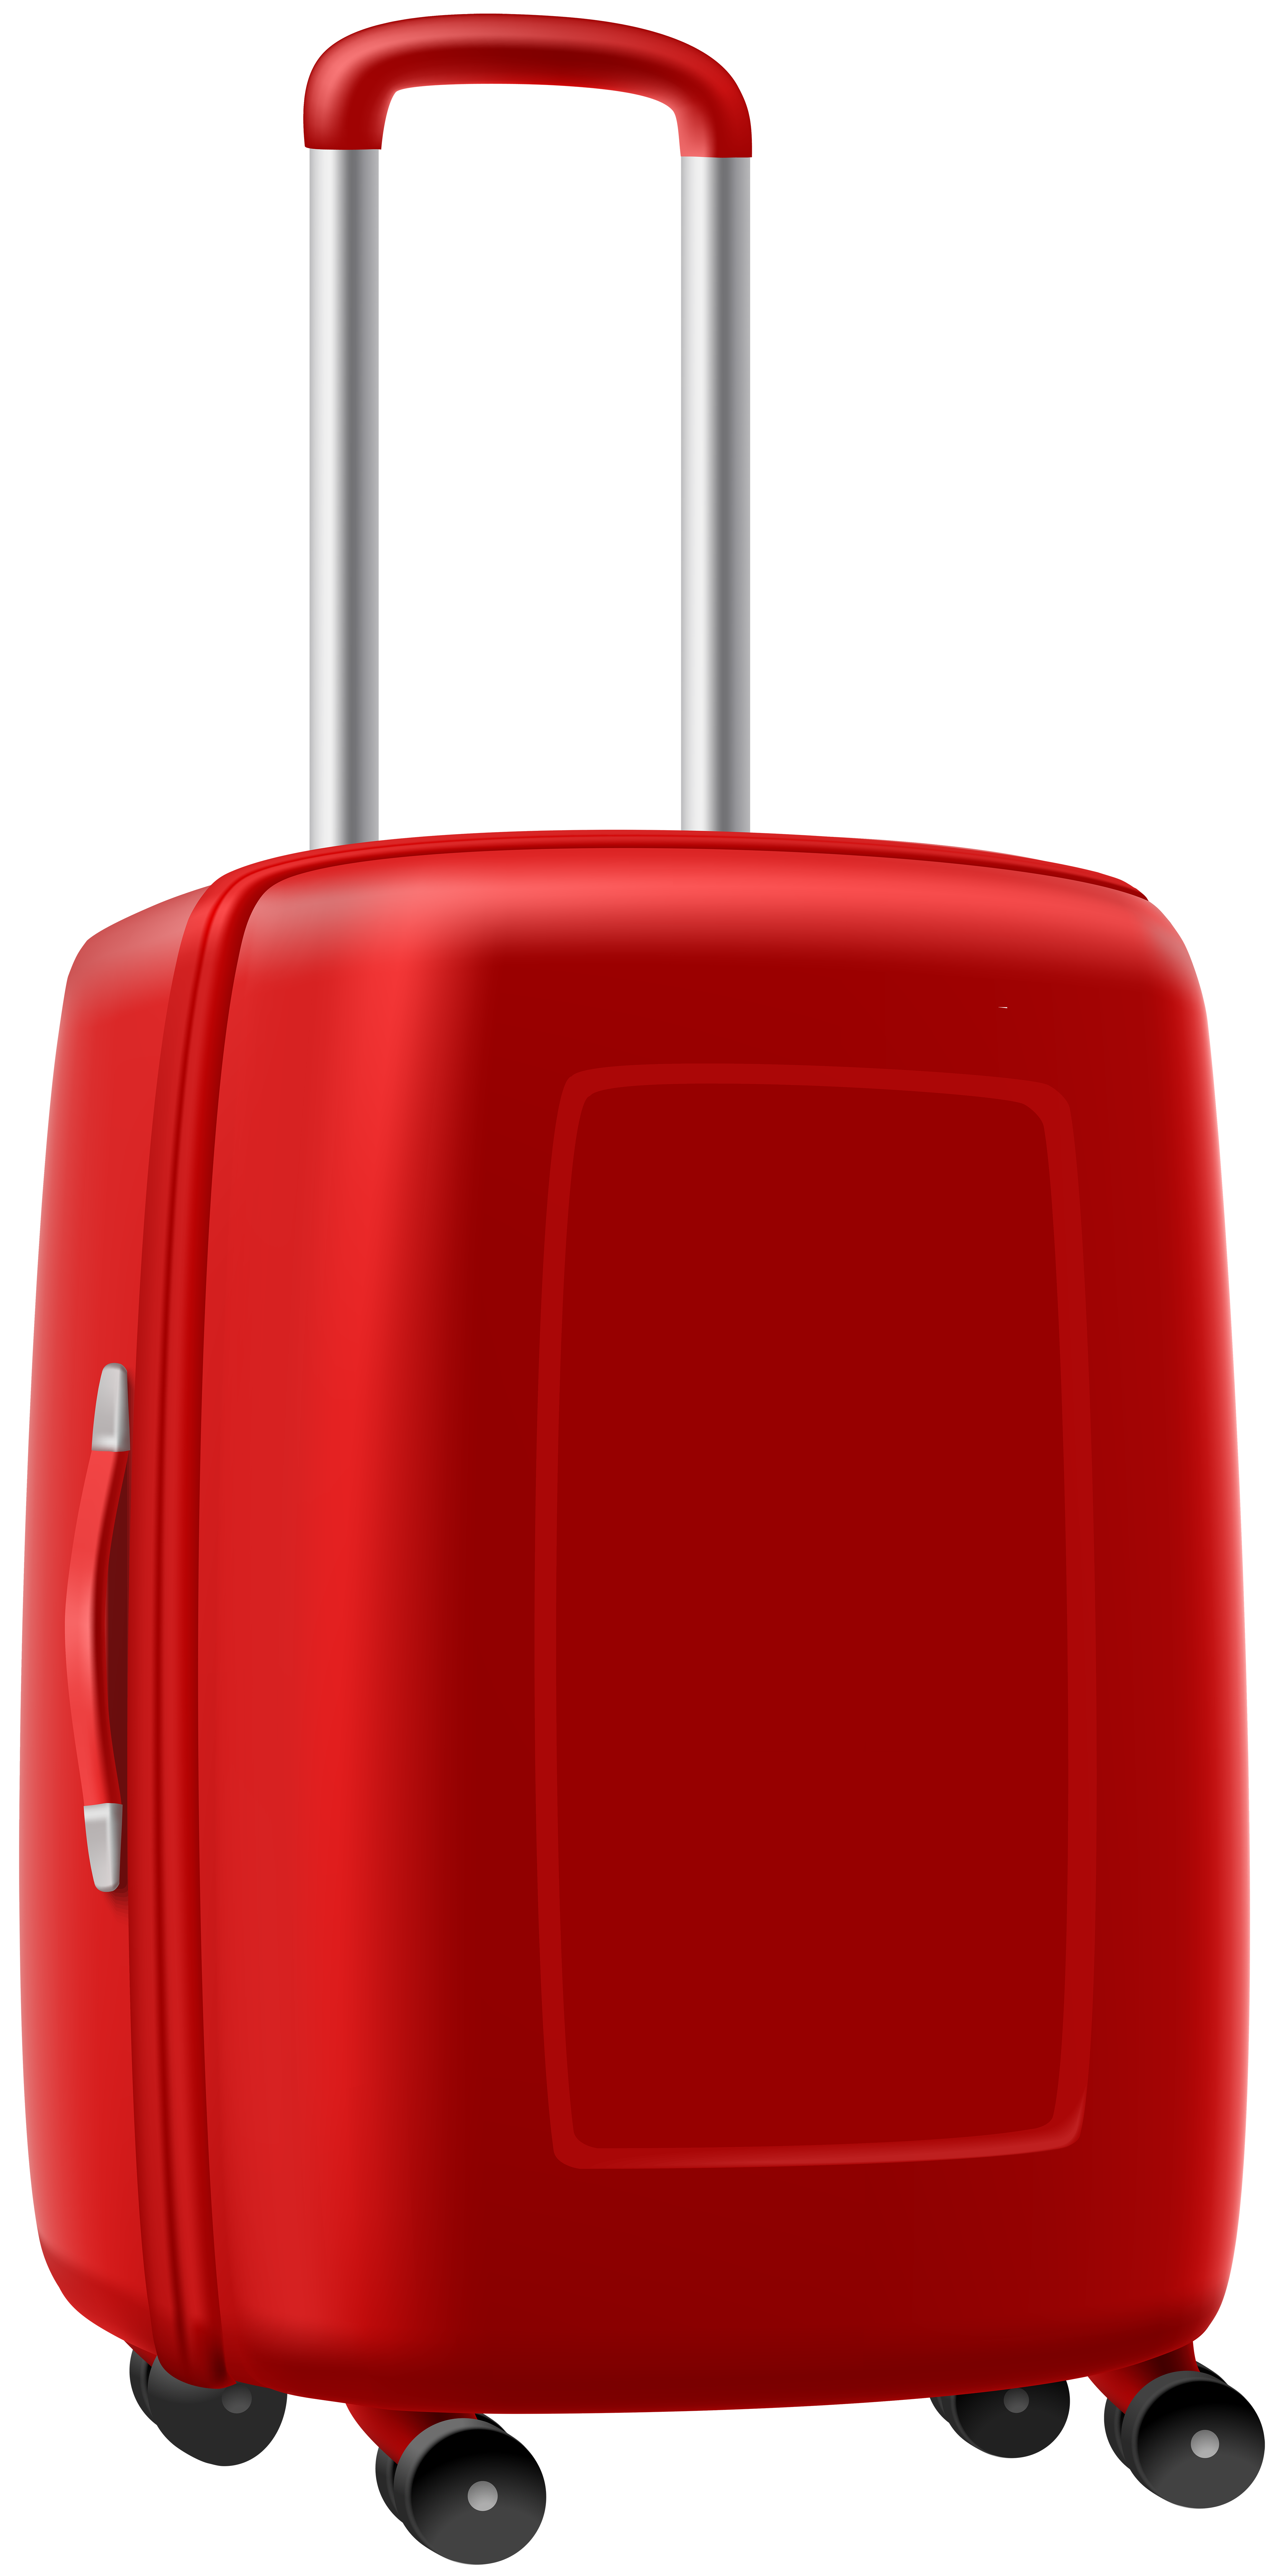 free clipart travel suitcase - photo #49